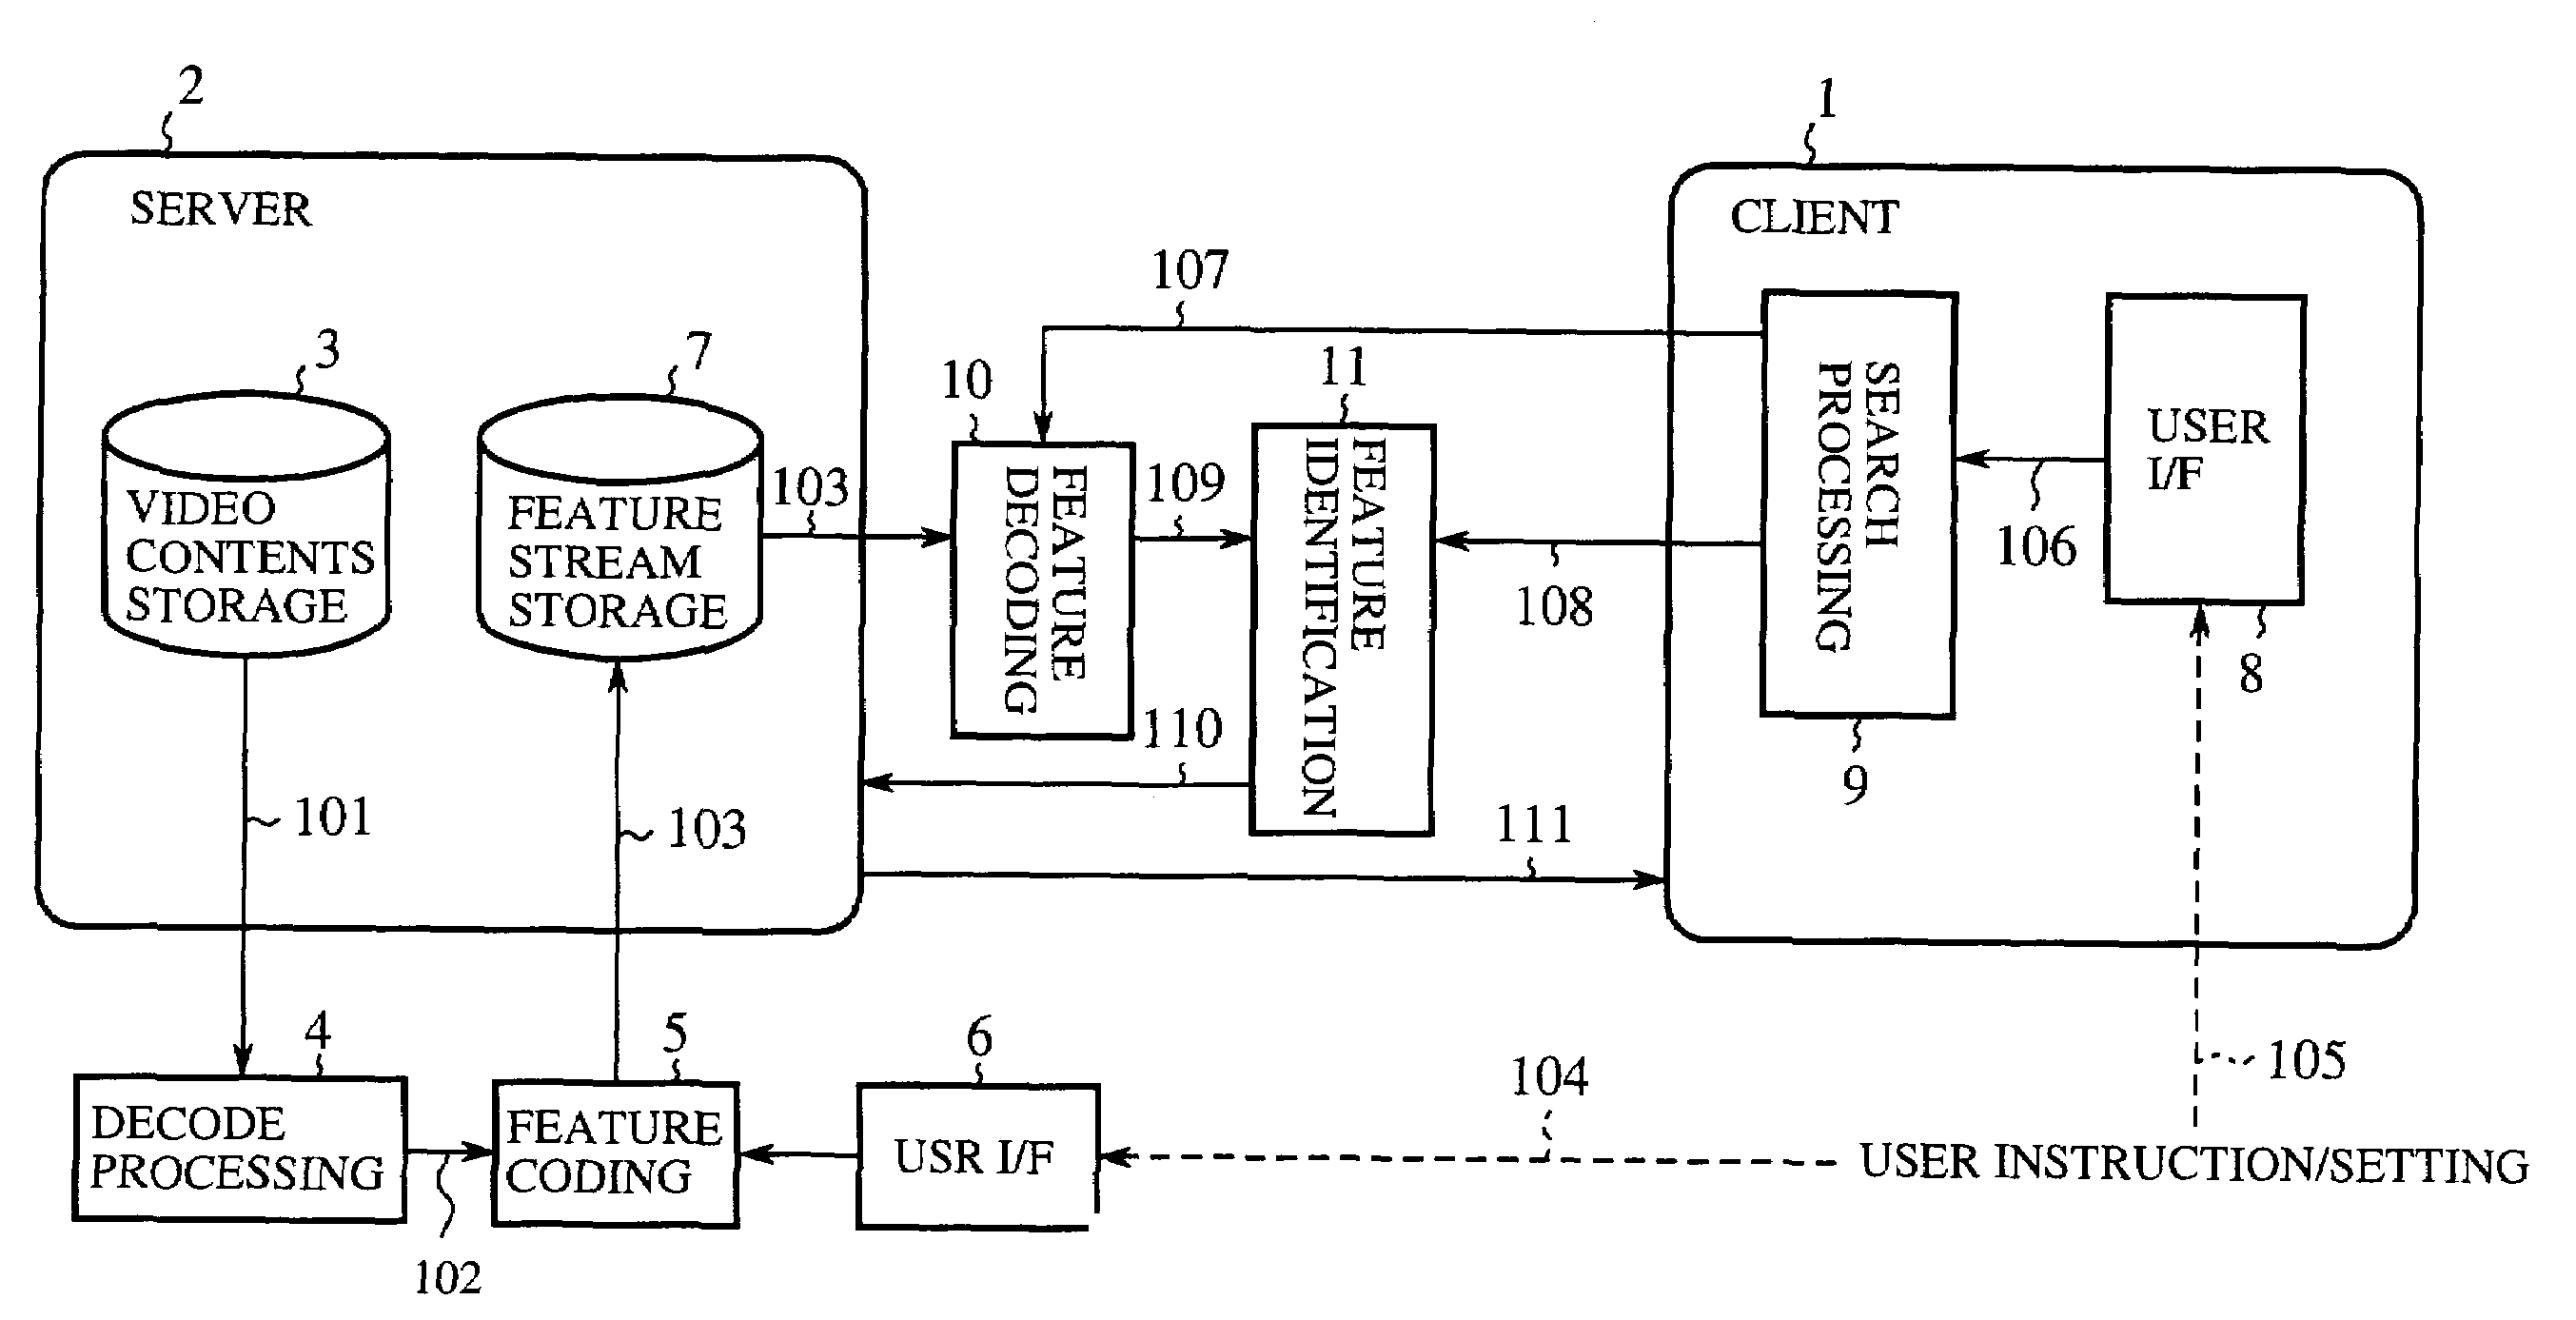 Method of image feature coding and method of image search